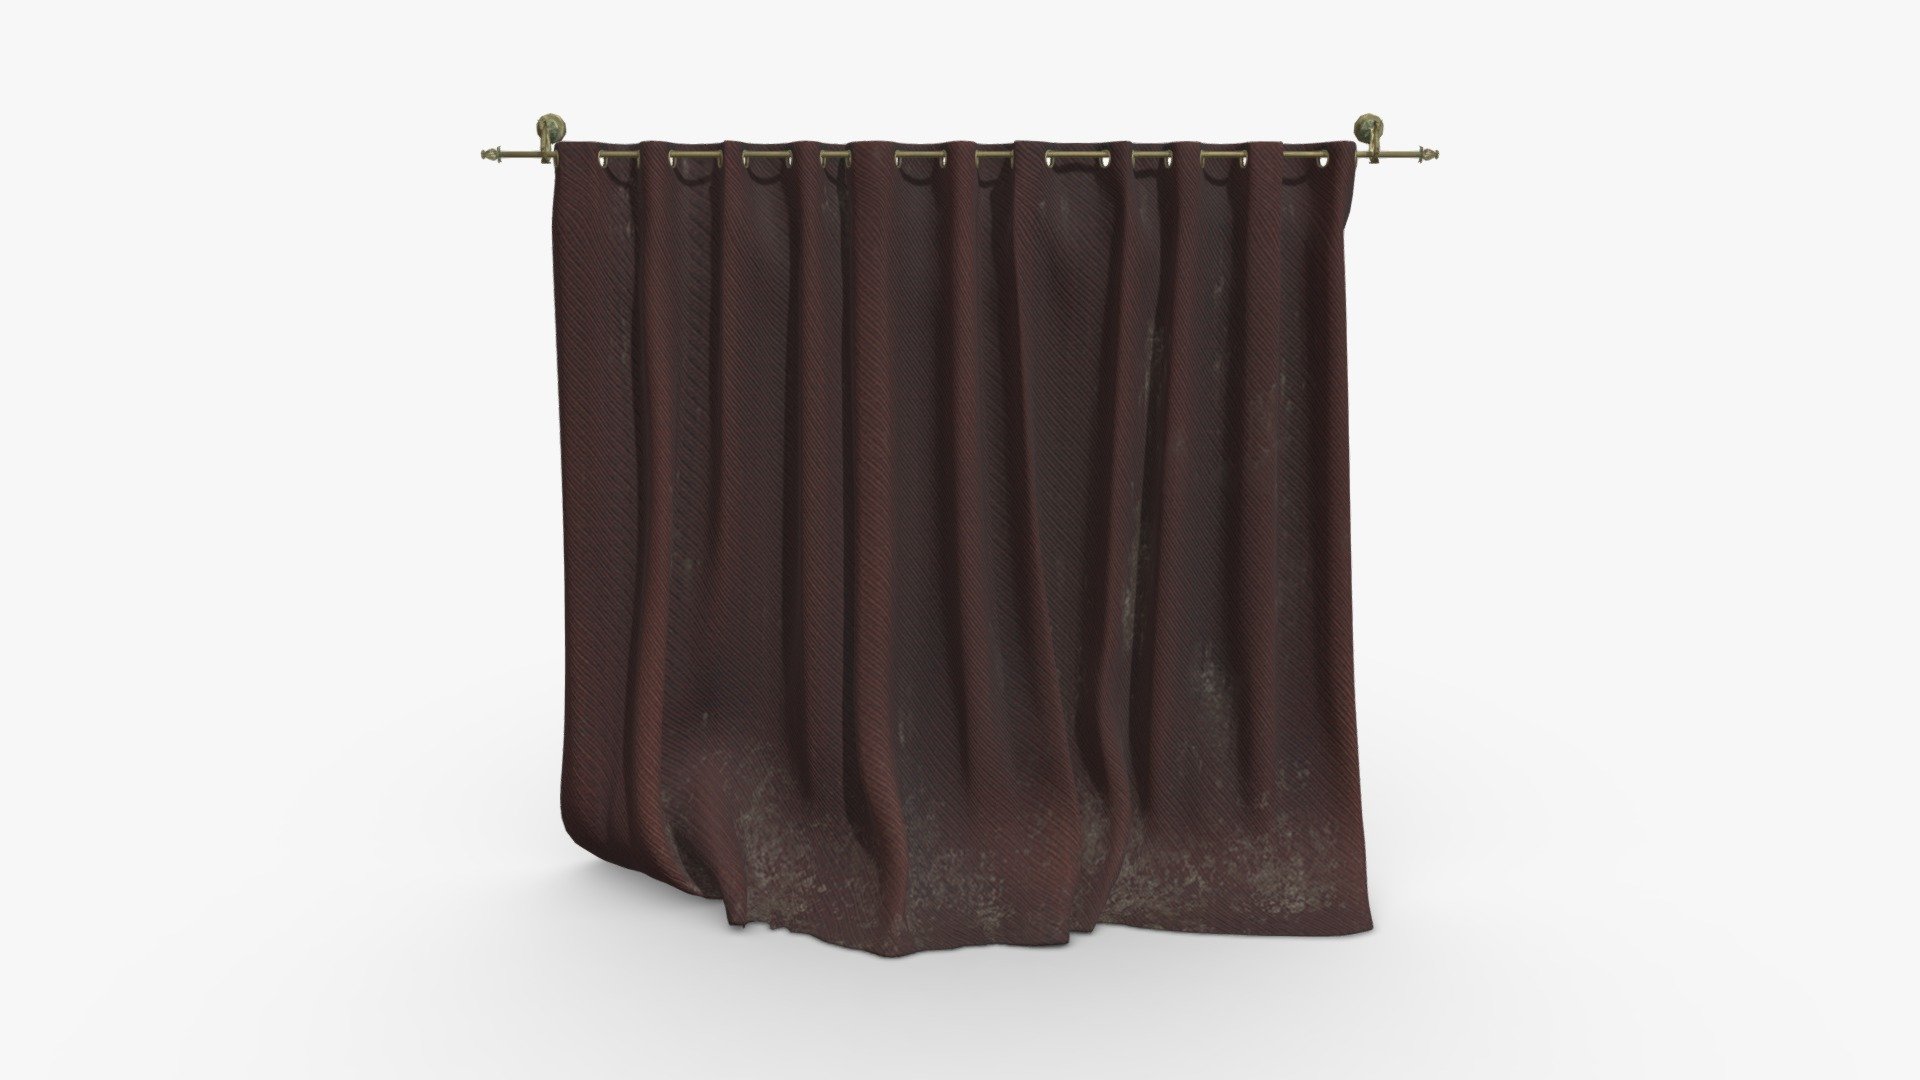 Check out my website for more products and better deals! &amp;gt;&amp;gt; SM5 by Heledahn &amp;lt;&amp;lt;

This is a digital 3d model of an antique looking Curtain, made of thick, crimson fabric and pig skin leather. The curtain is held by a ornamental metal bar, decorated with ivy leaves and other organic shapes, that offer the curtain a beautiful Medieval/Fantasy appearance.
This model can be used for any Medieval/Fantasy themed render project, used either as a background prop, or as a closeup prop due to its high detail and visual quality.

This product will achieve realistic results in your rendering projects and animations, being greatly suited for close-ups due to their high quality topology and PBR shading 3d model